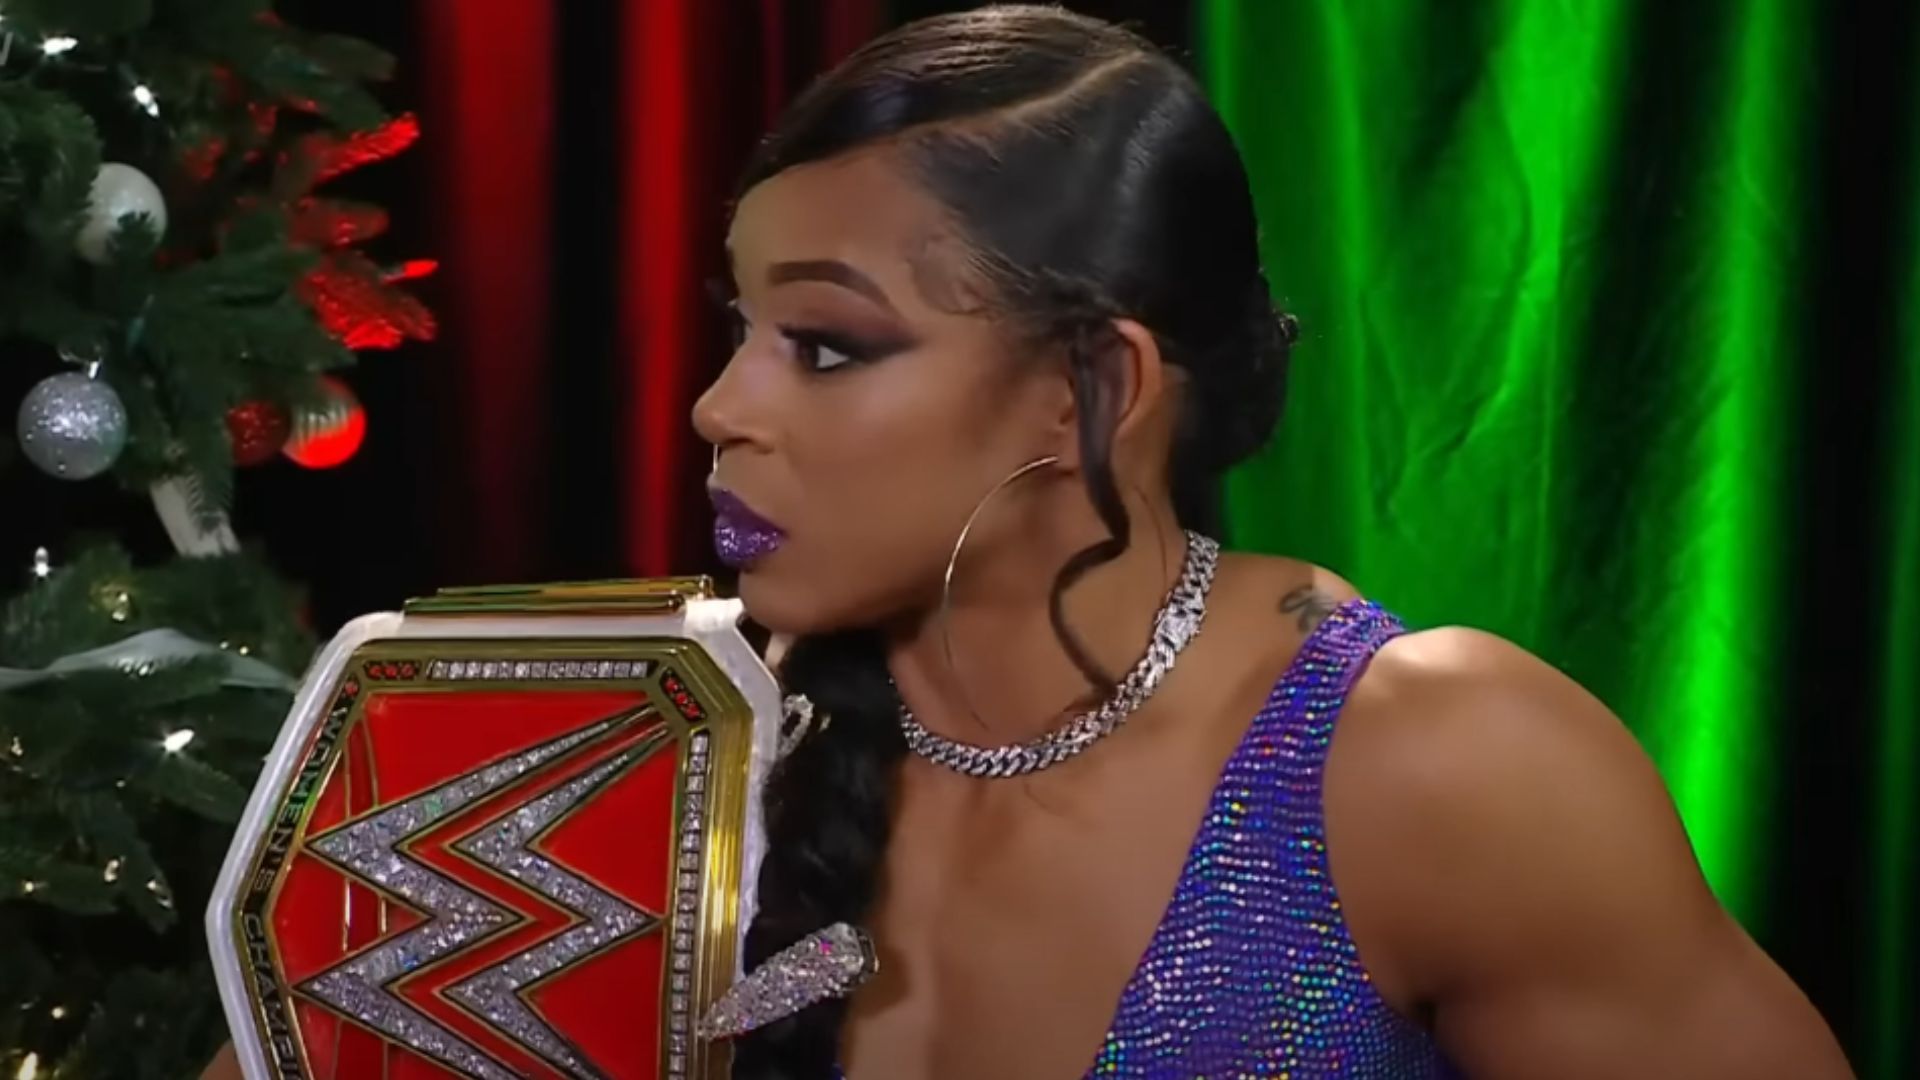 Bianca Belair is a two-time WWE Women